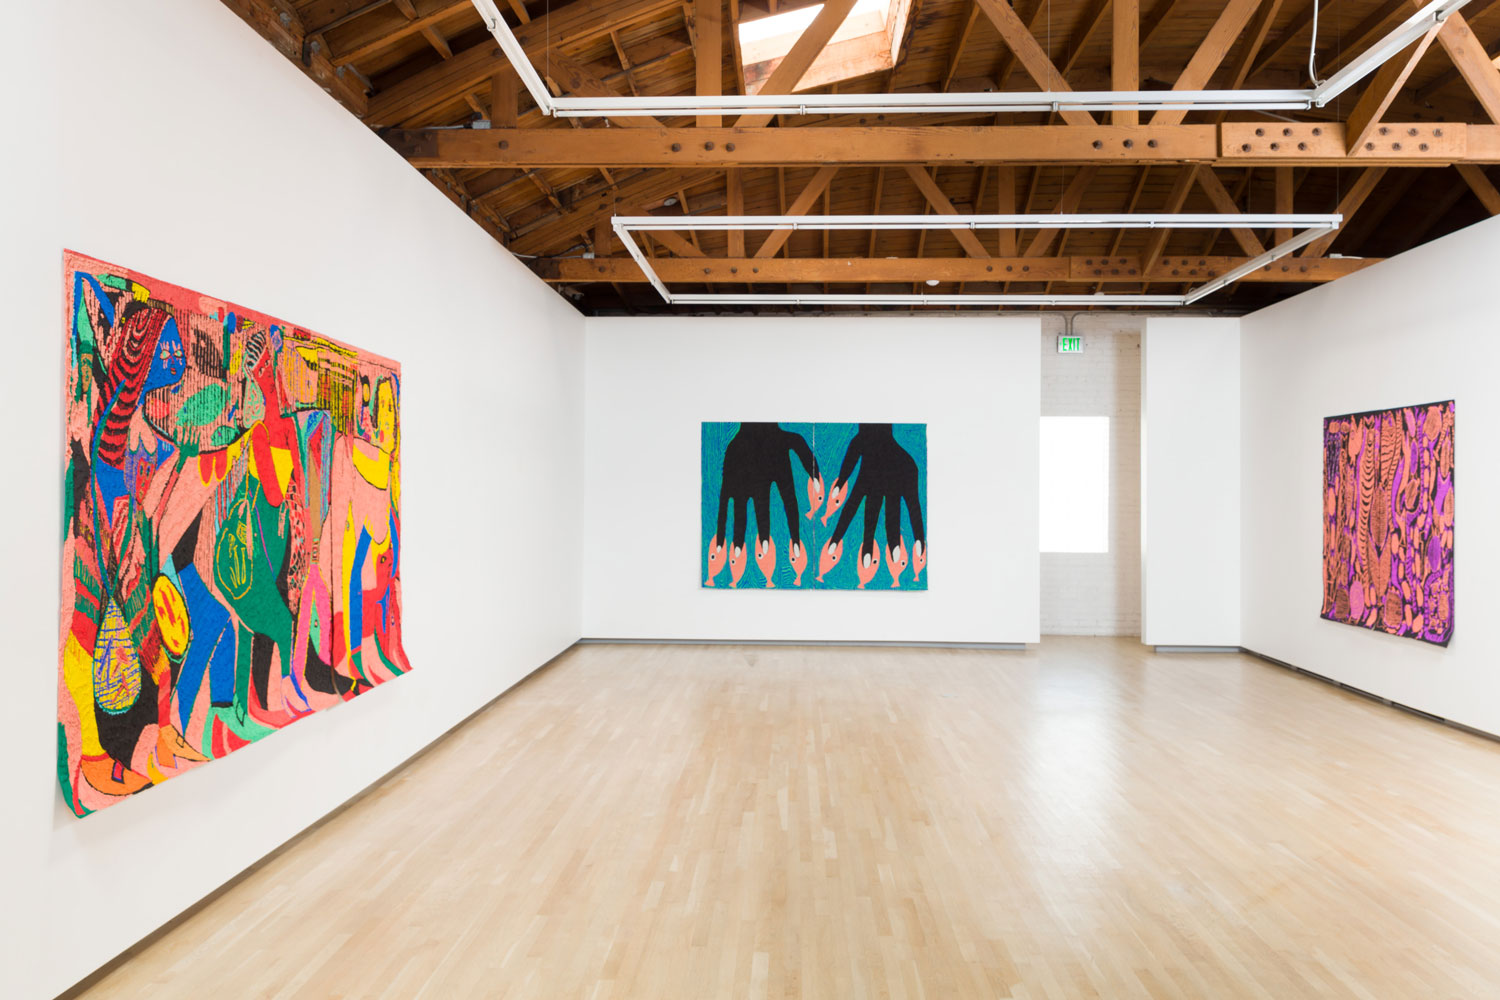 Summer Wheat, Catch and Release, 2018, Installation view, Shulamit Nazarian, Los Angeles